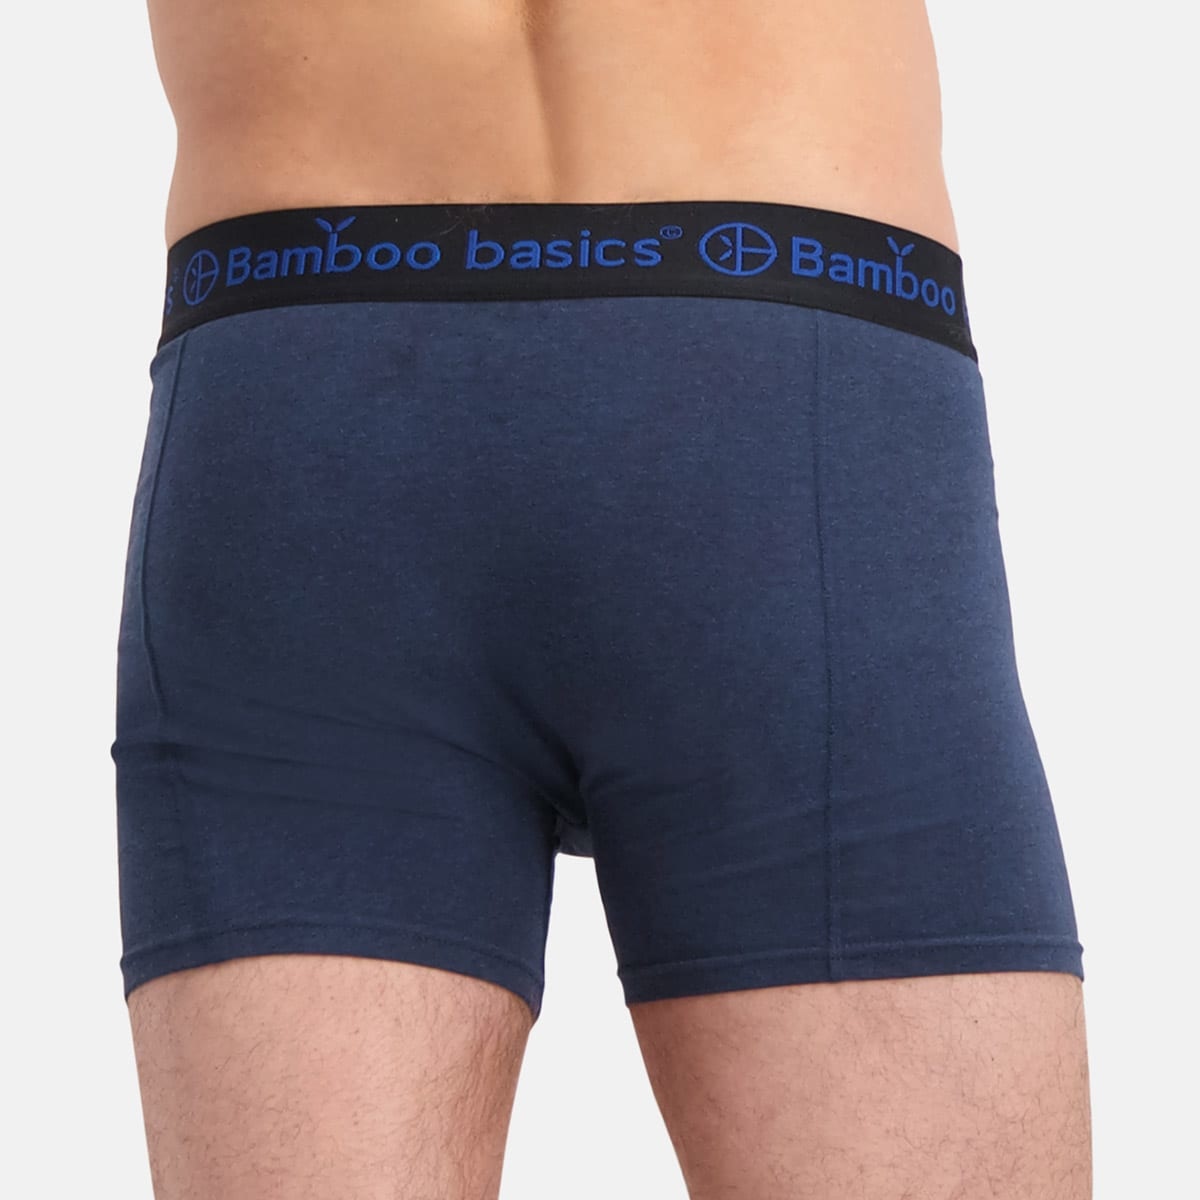 Magnus, Royal Blue Bamboo Boxer Briefs, In stock!